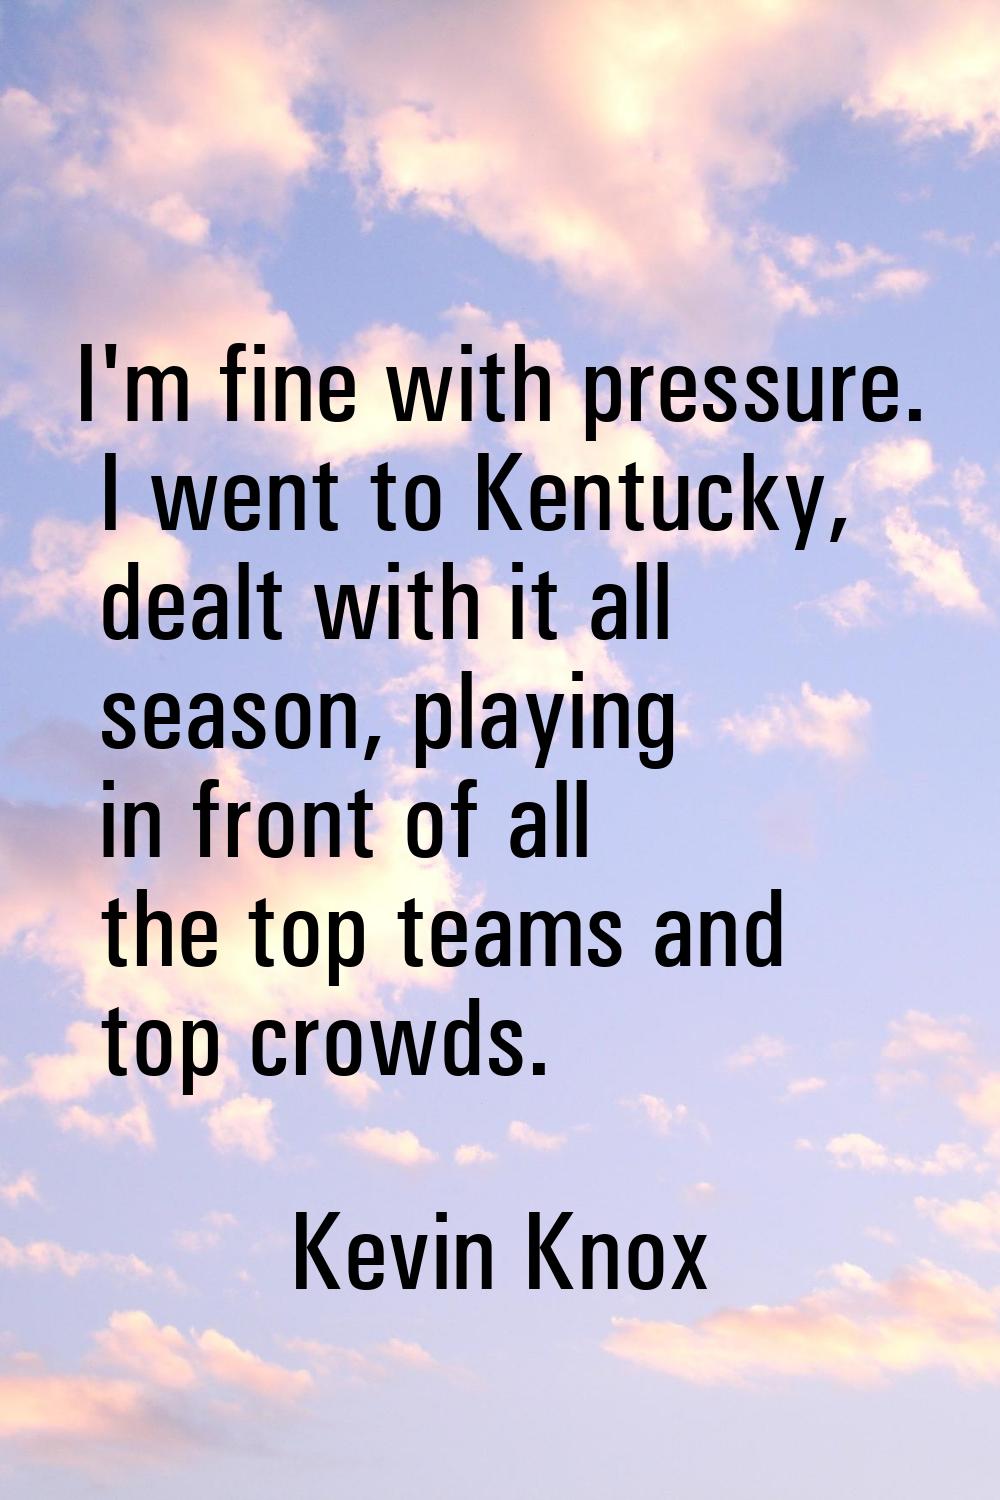 I'm fine with pressure. I went to Kentucky, dealt with it all season, playing in front of all the t